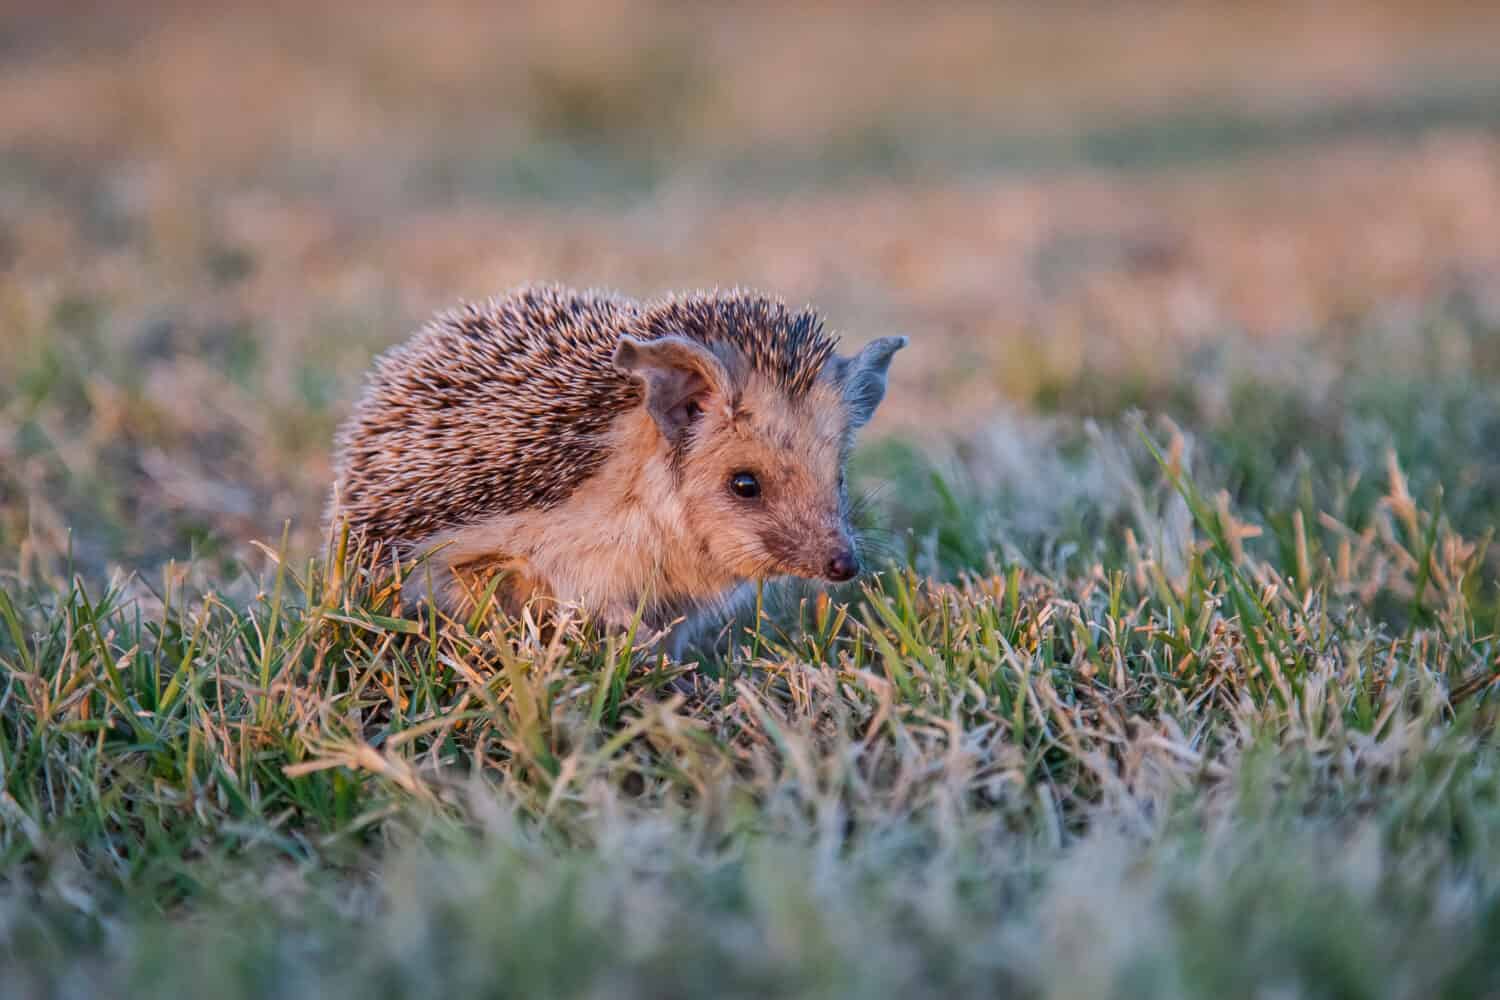 Southern White-breasted Hedgehog (Erinaceus concolor) is common in Europe and Turkey. Mostly bugs, slugs, worms, rarely small mice and snake puppies eat.